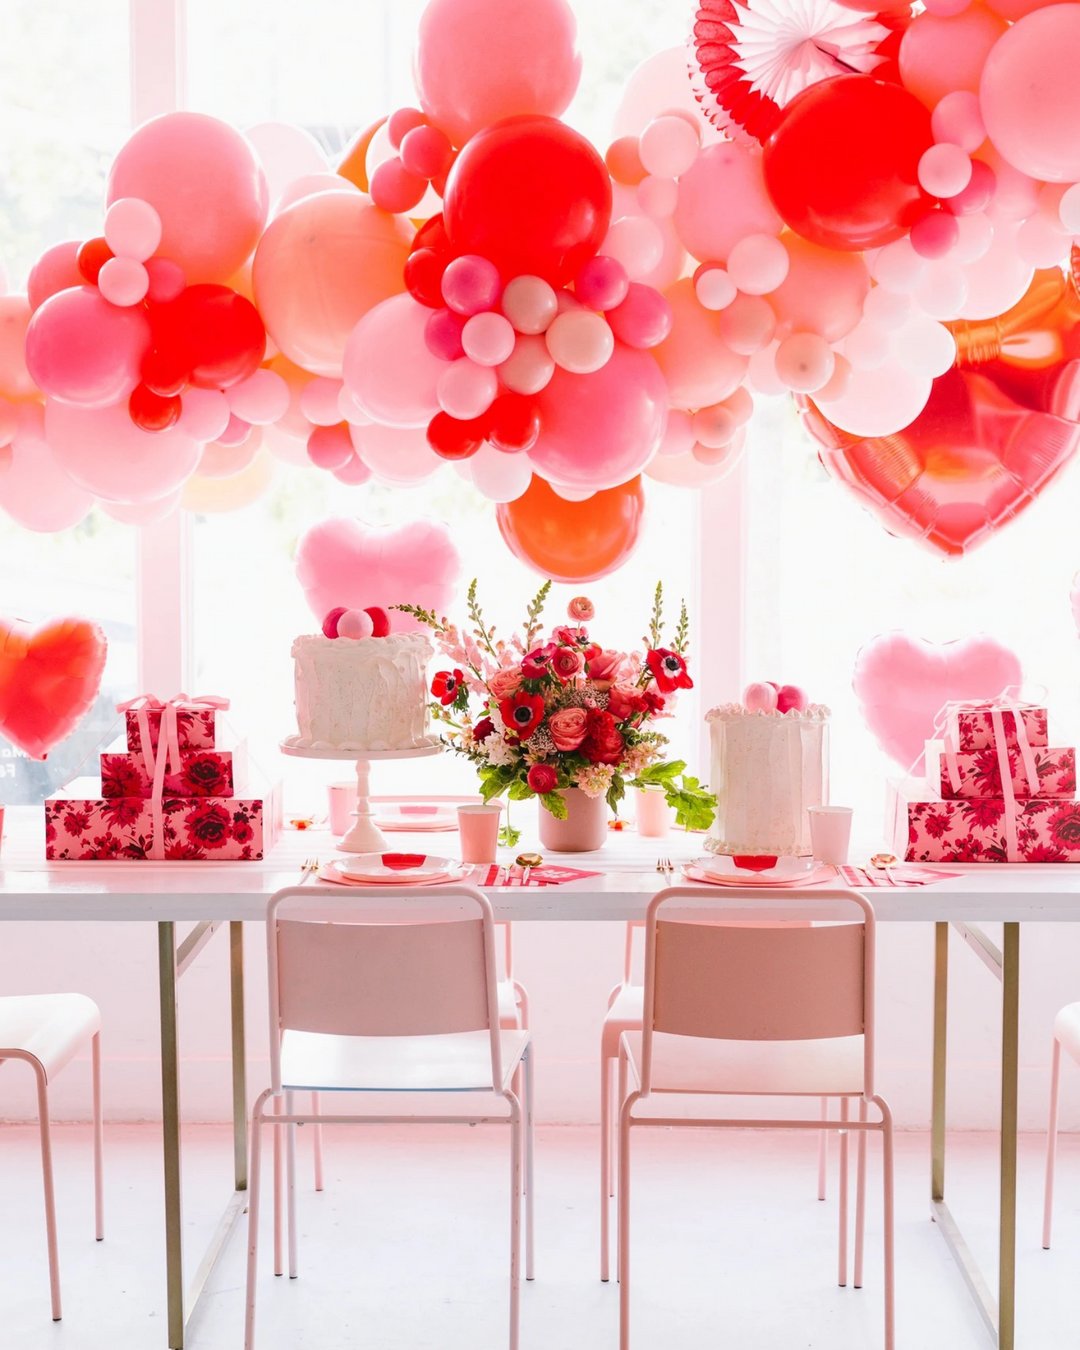 Valentine's Day party Valentine's Day party decorations Valentine's Day party supplies pink and red balloons